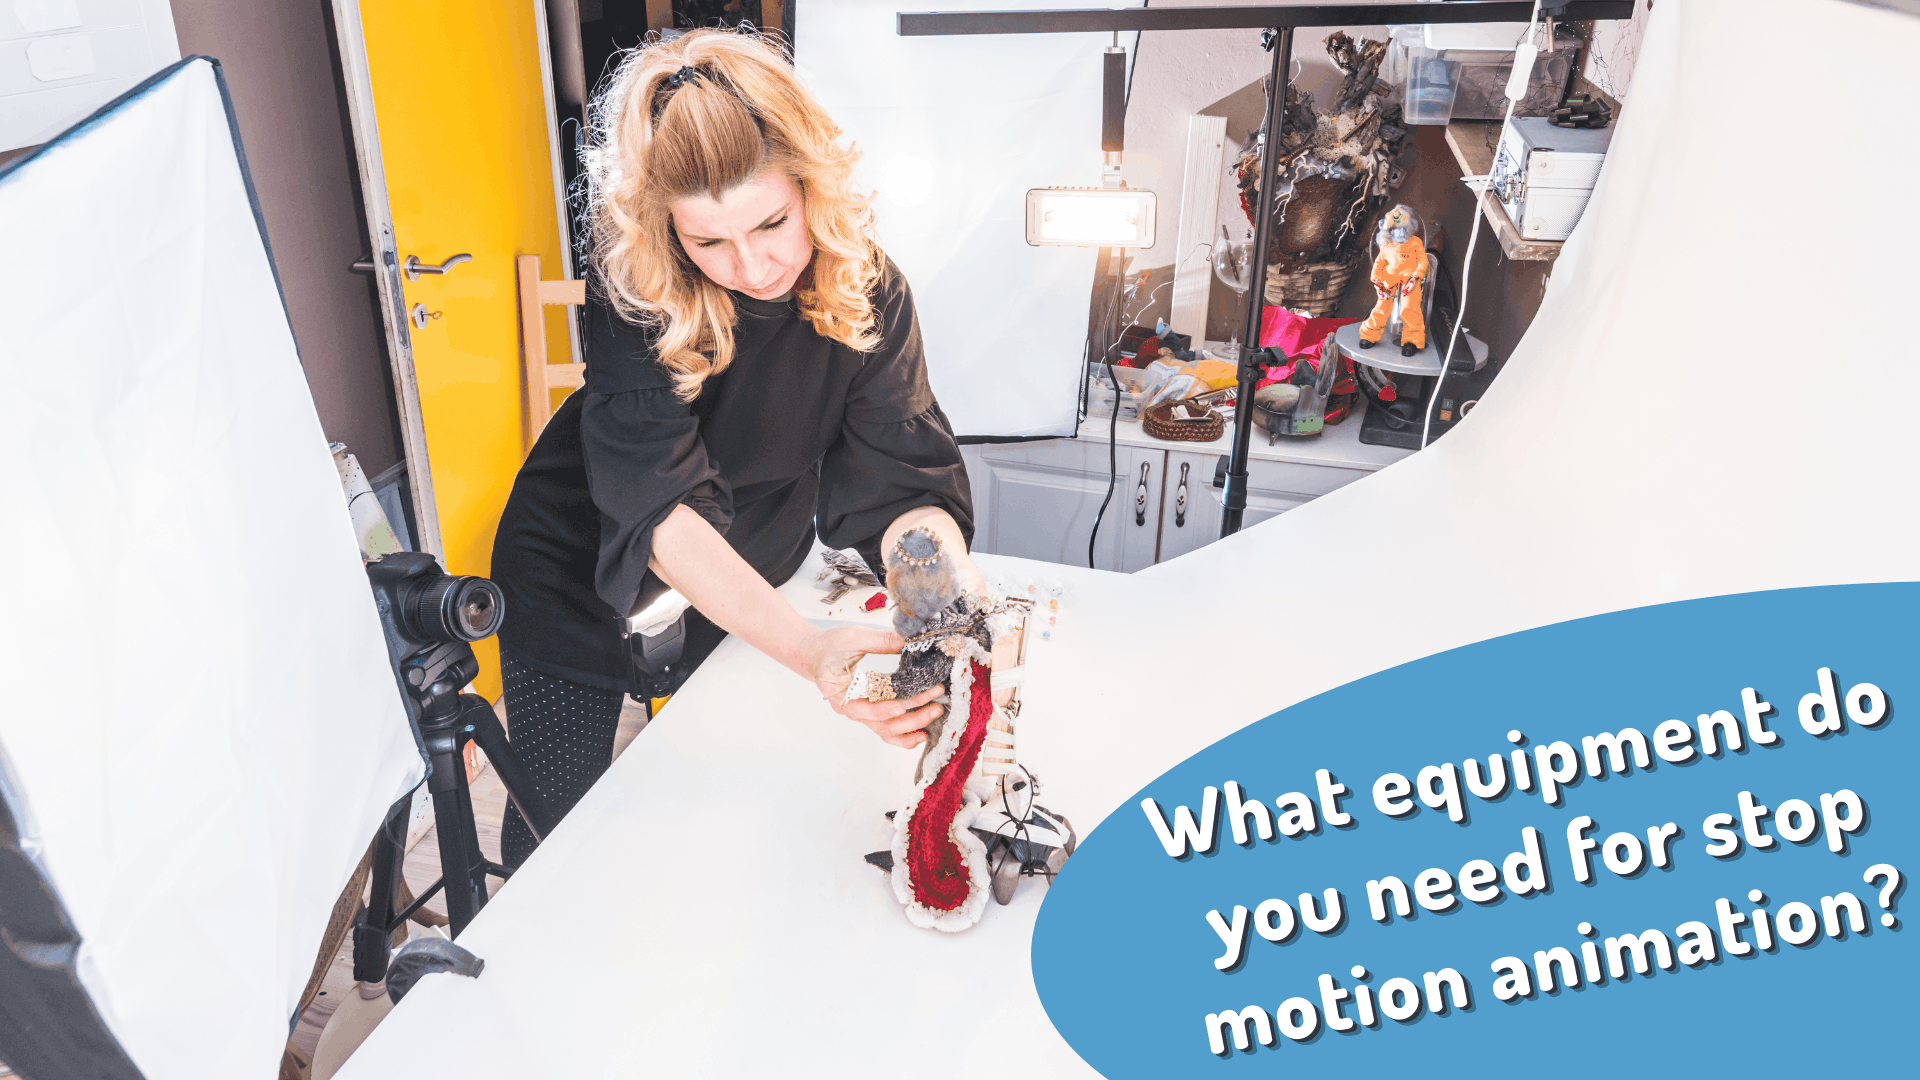 What equipment do you need for stop motion animation?